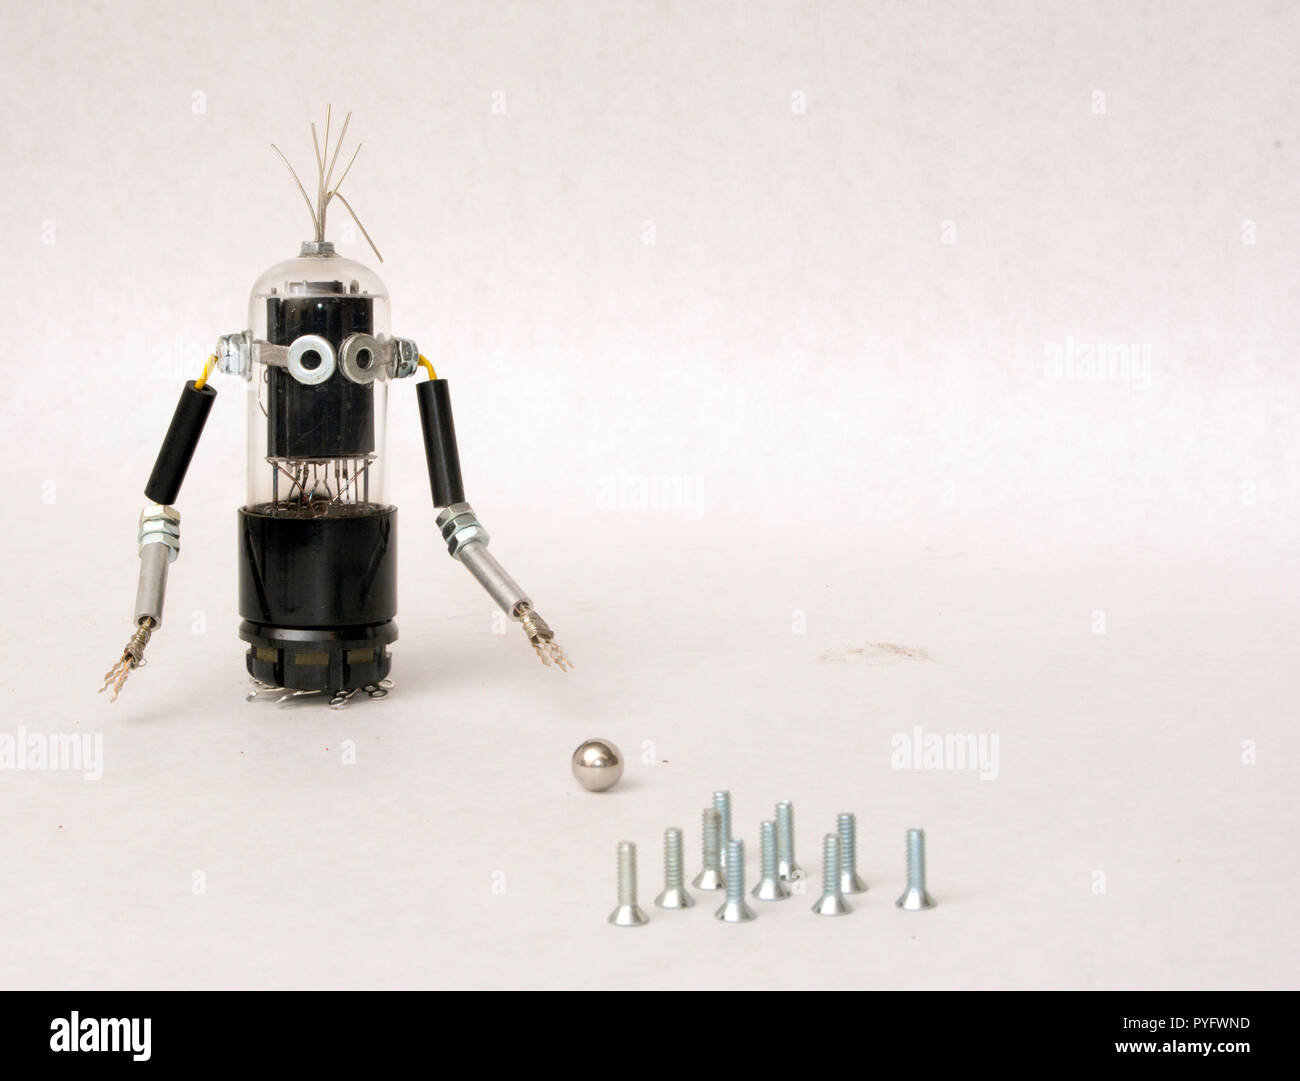 Robot figure bowling with screws Stock Photo